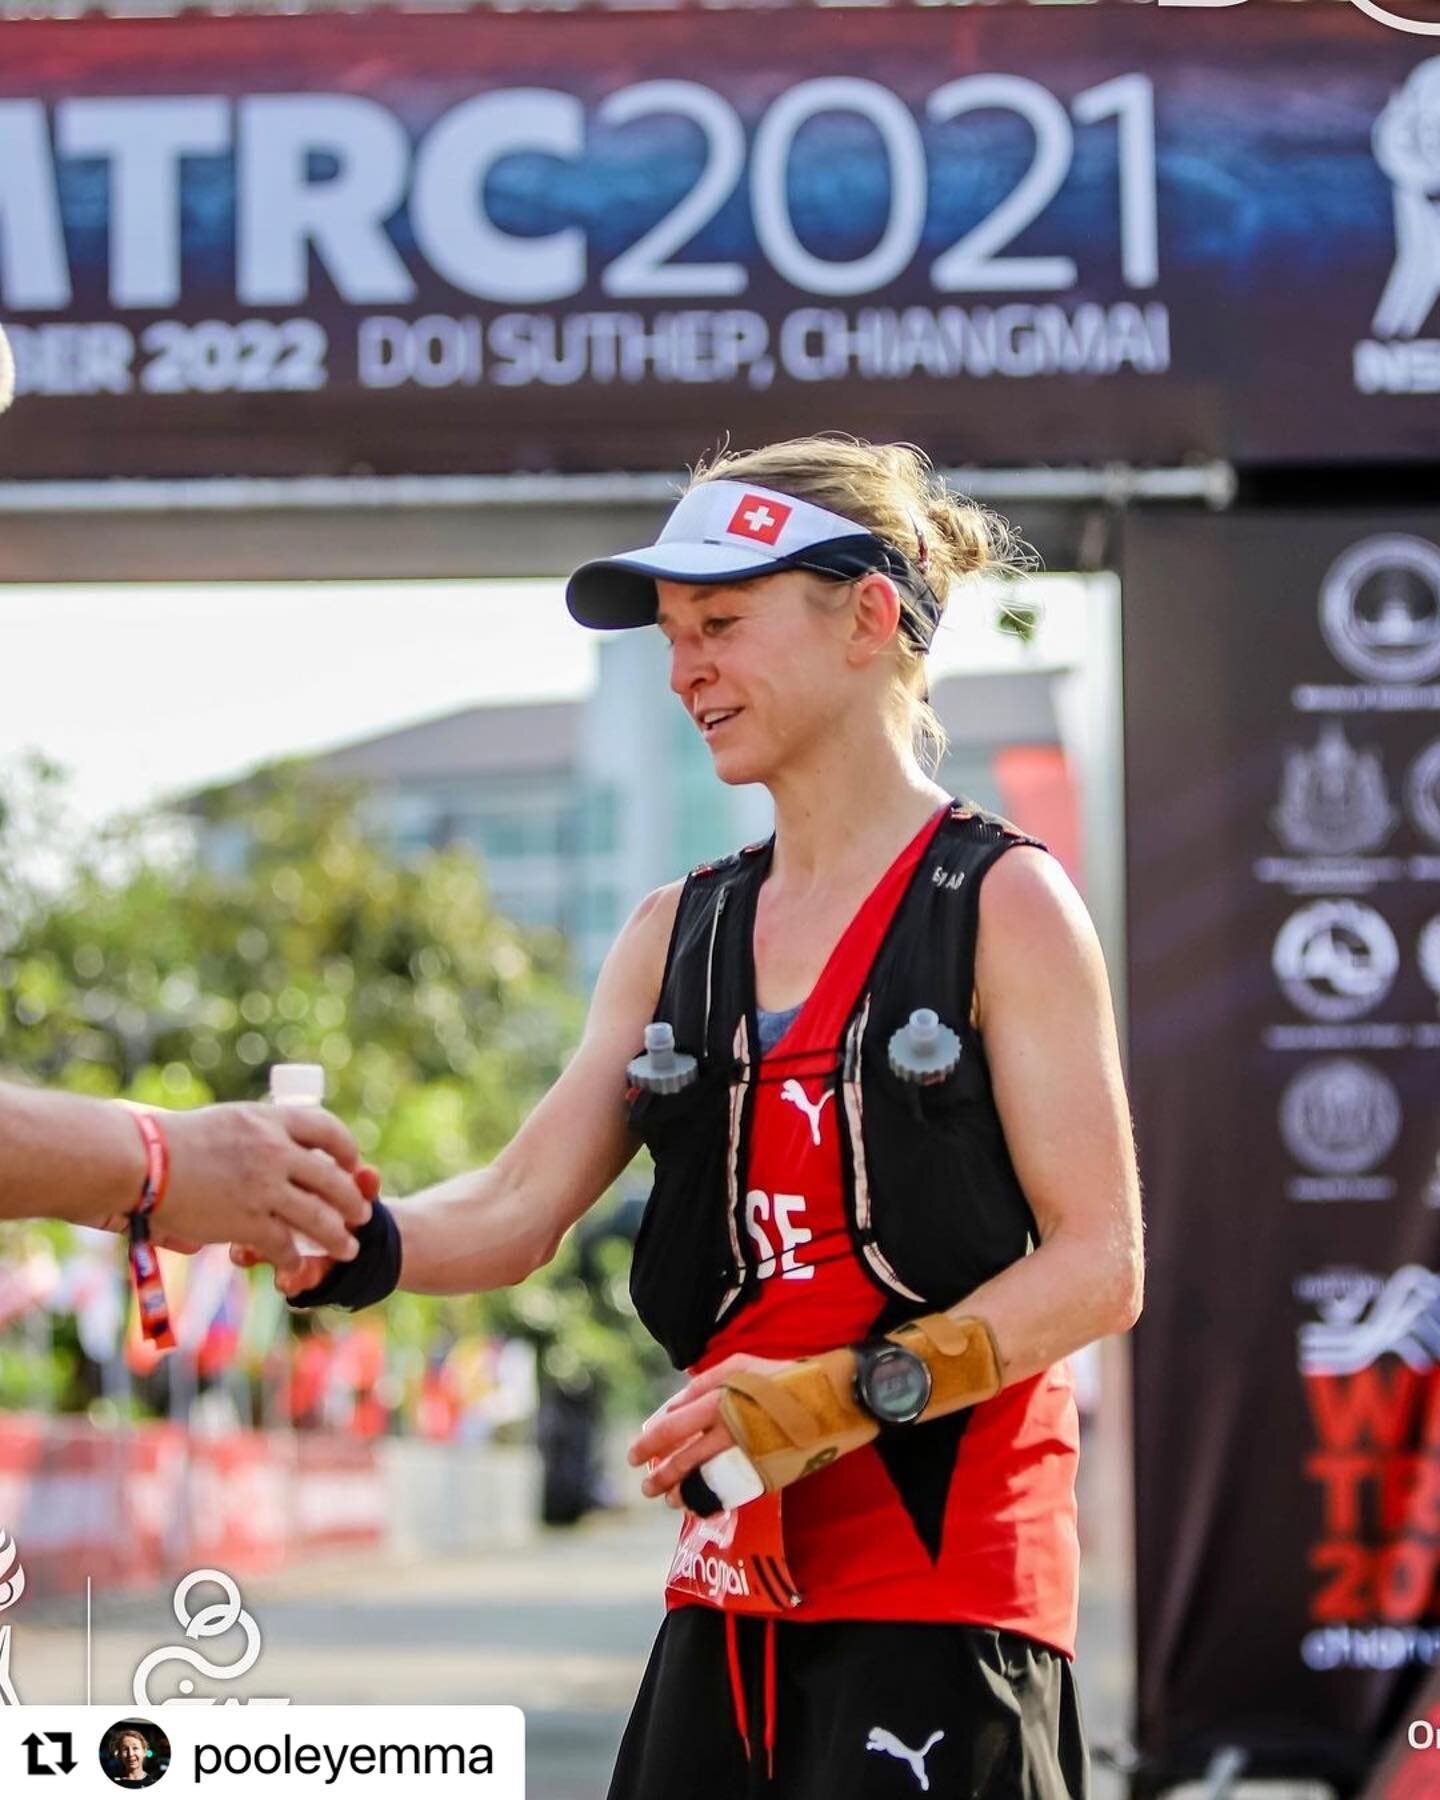 Proud coach moment 😊Congrats to #teamhp3 coached athlete @pooleyemma  for a superb performance at the world mountain &amp; trail running champs&rsquo; - having fun and smiling is what it&rsquo;s all about (even when held together with sticky back pl